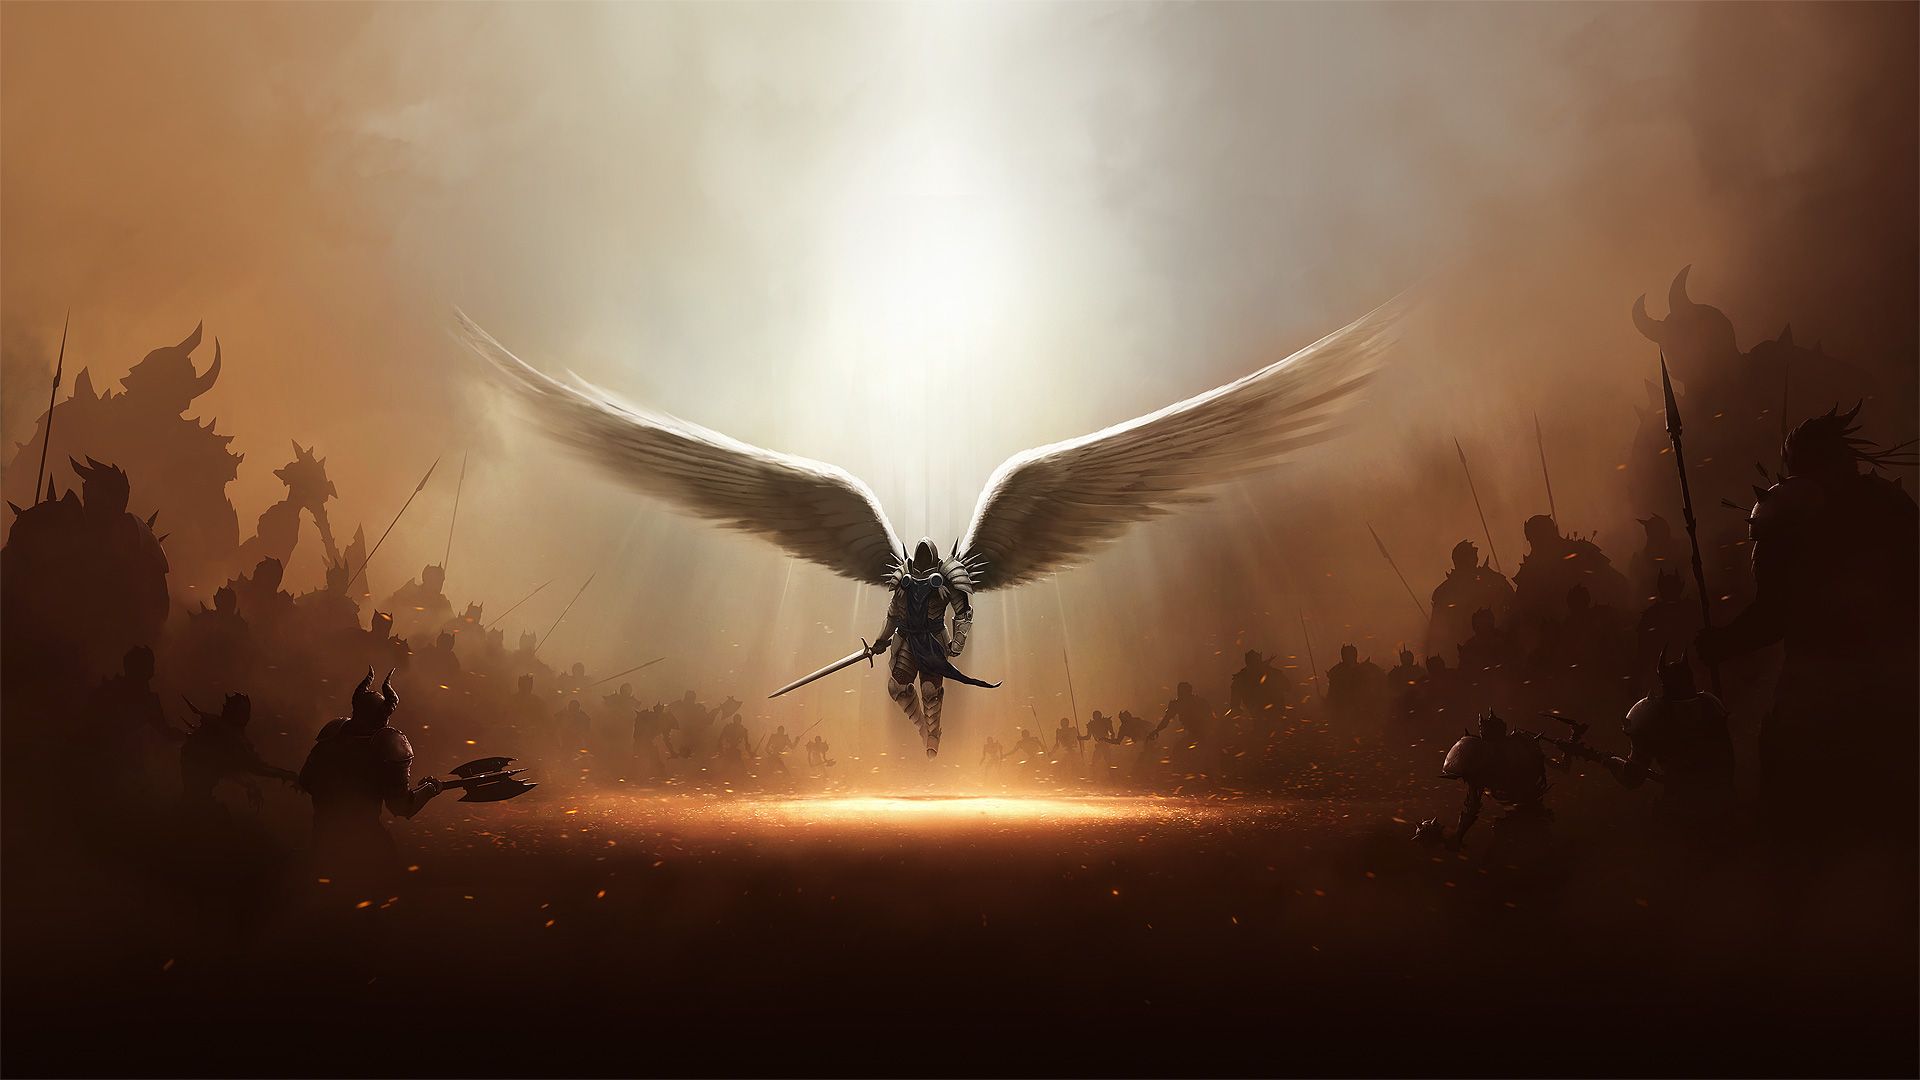 The Archangel Tyreal (x-post from /r/wallpapers : Diablo